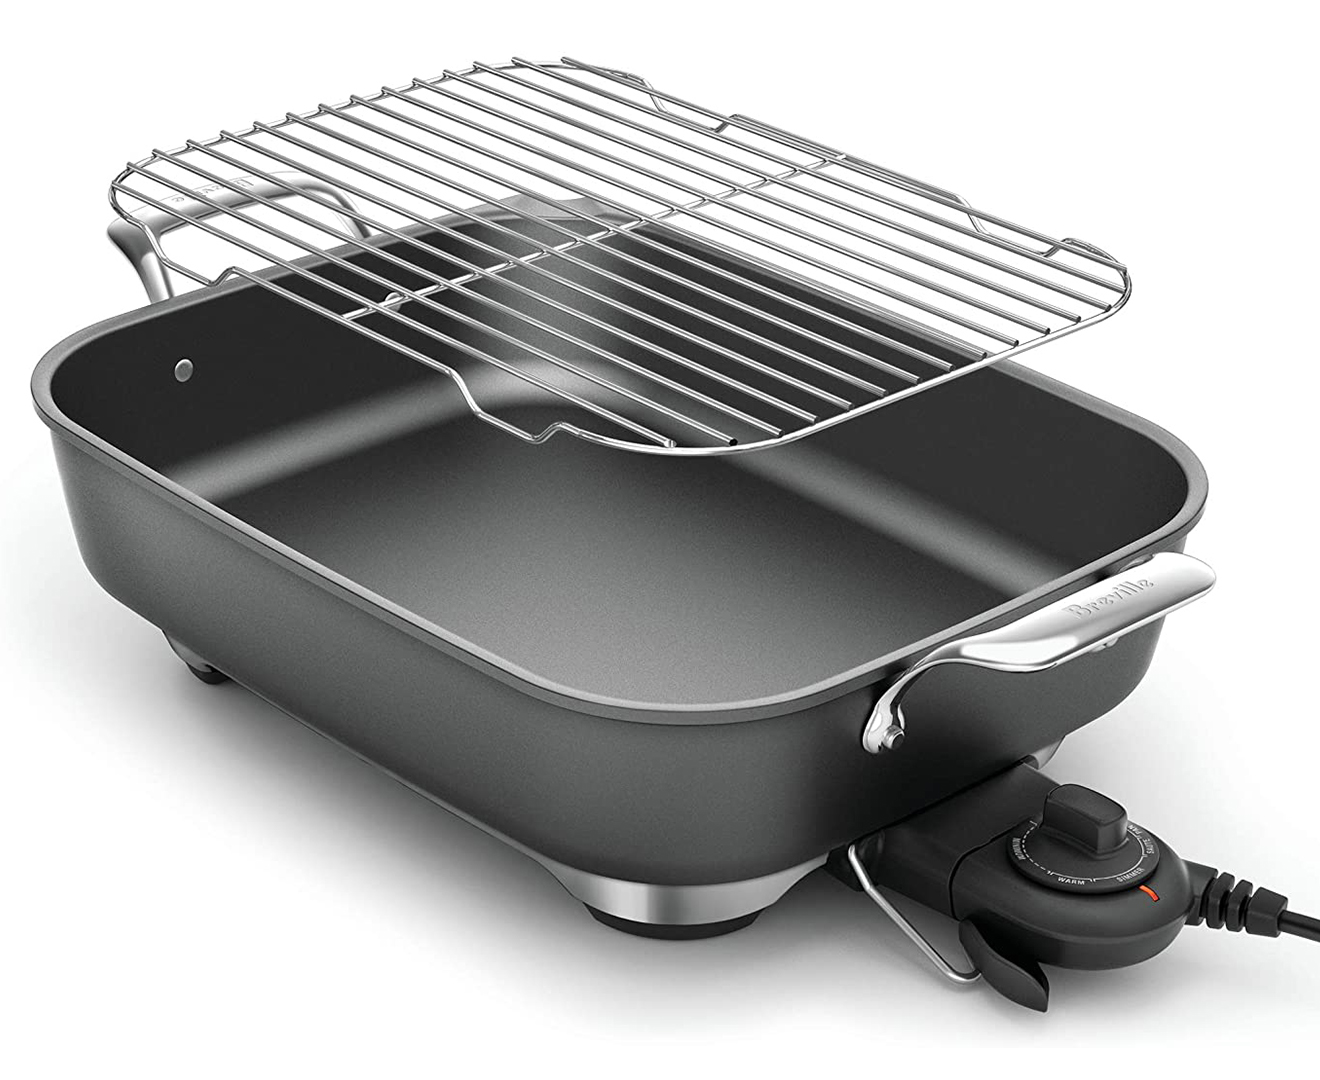 Breville Banquet Electric Frypan, BEF250GRY - Cooking